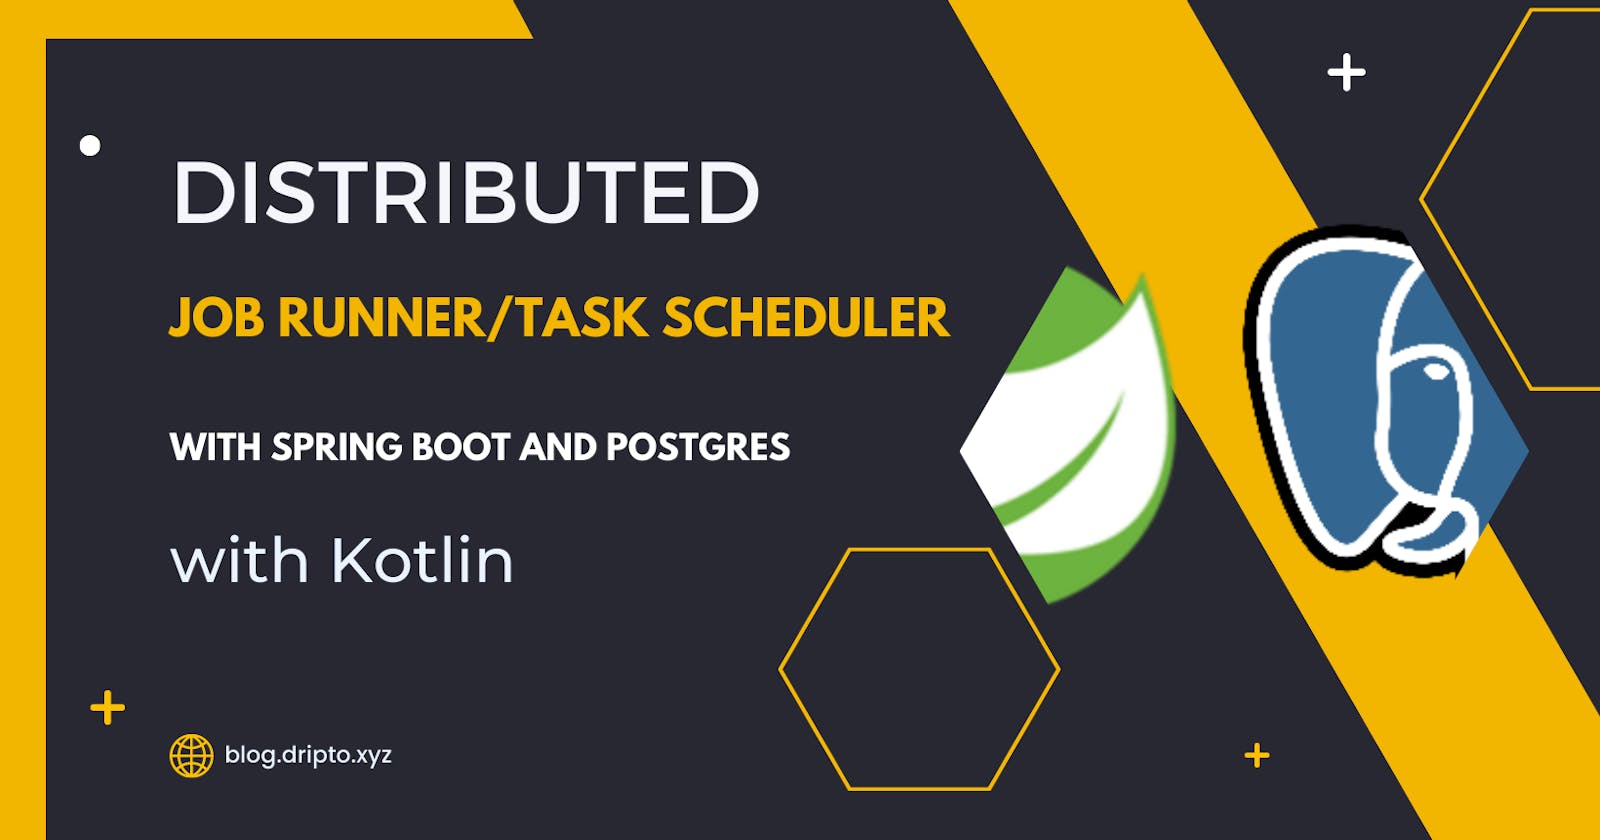 Distributed job runner/task scheduler with postgres and spring